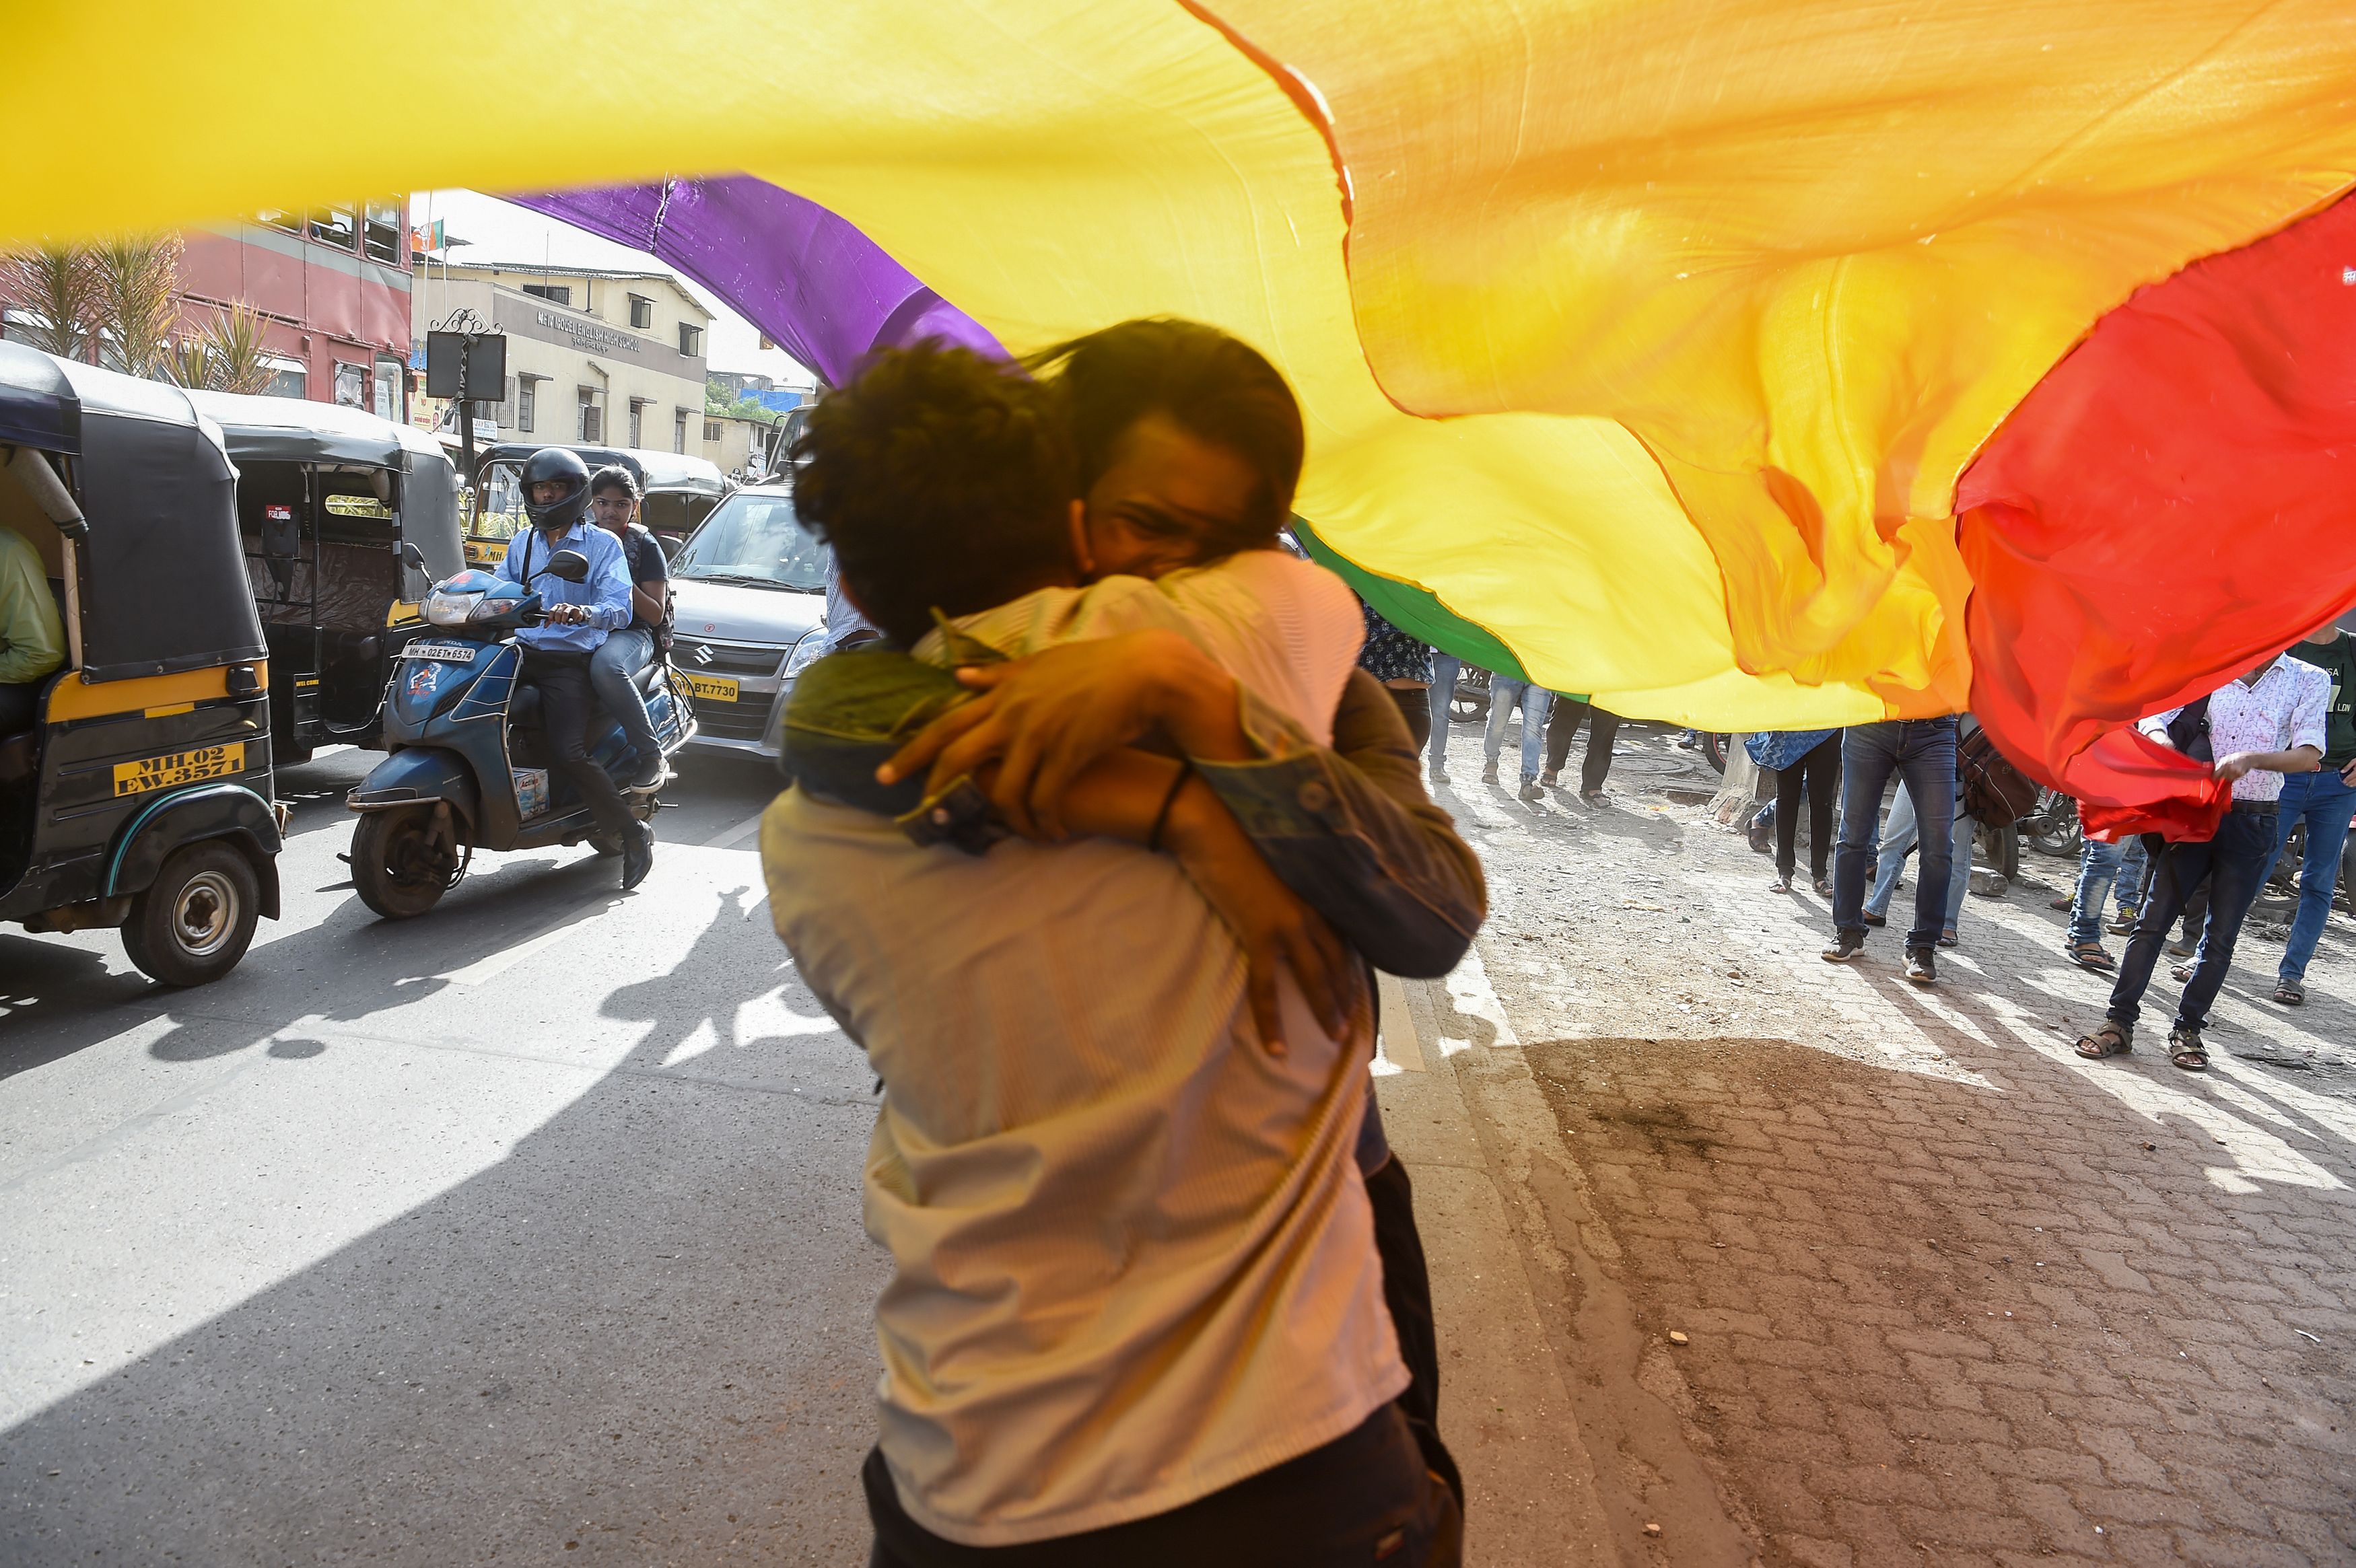 Members and supporters of the LGBTQ community in Mumbai celebrate the Indian supreme court decision to strike down a colonial-era ban on same-sex relations on Sep. 6, 2018. (Indranil Mukherjee/ AFP via Getty Images)